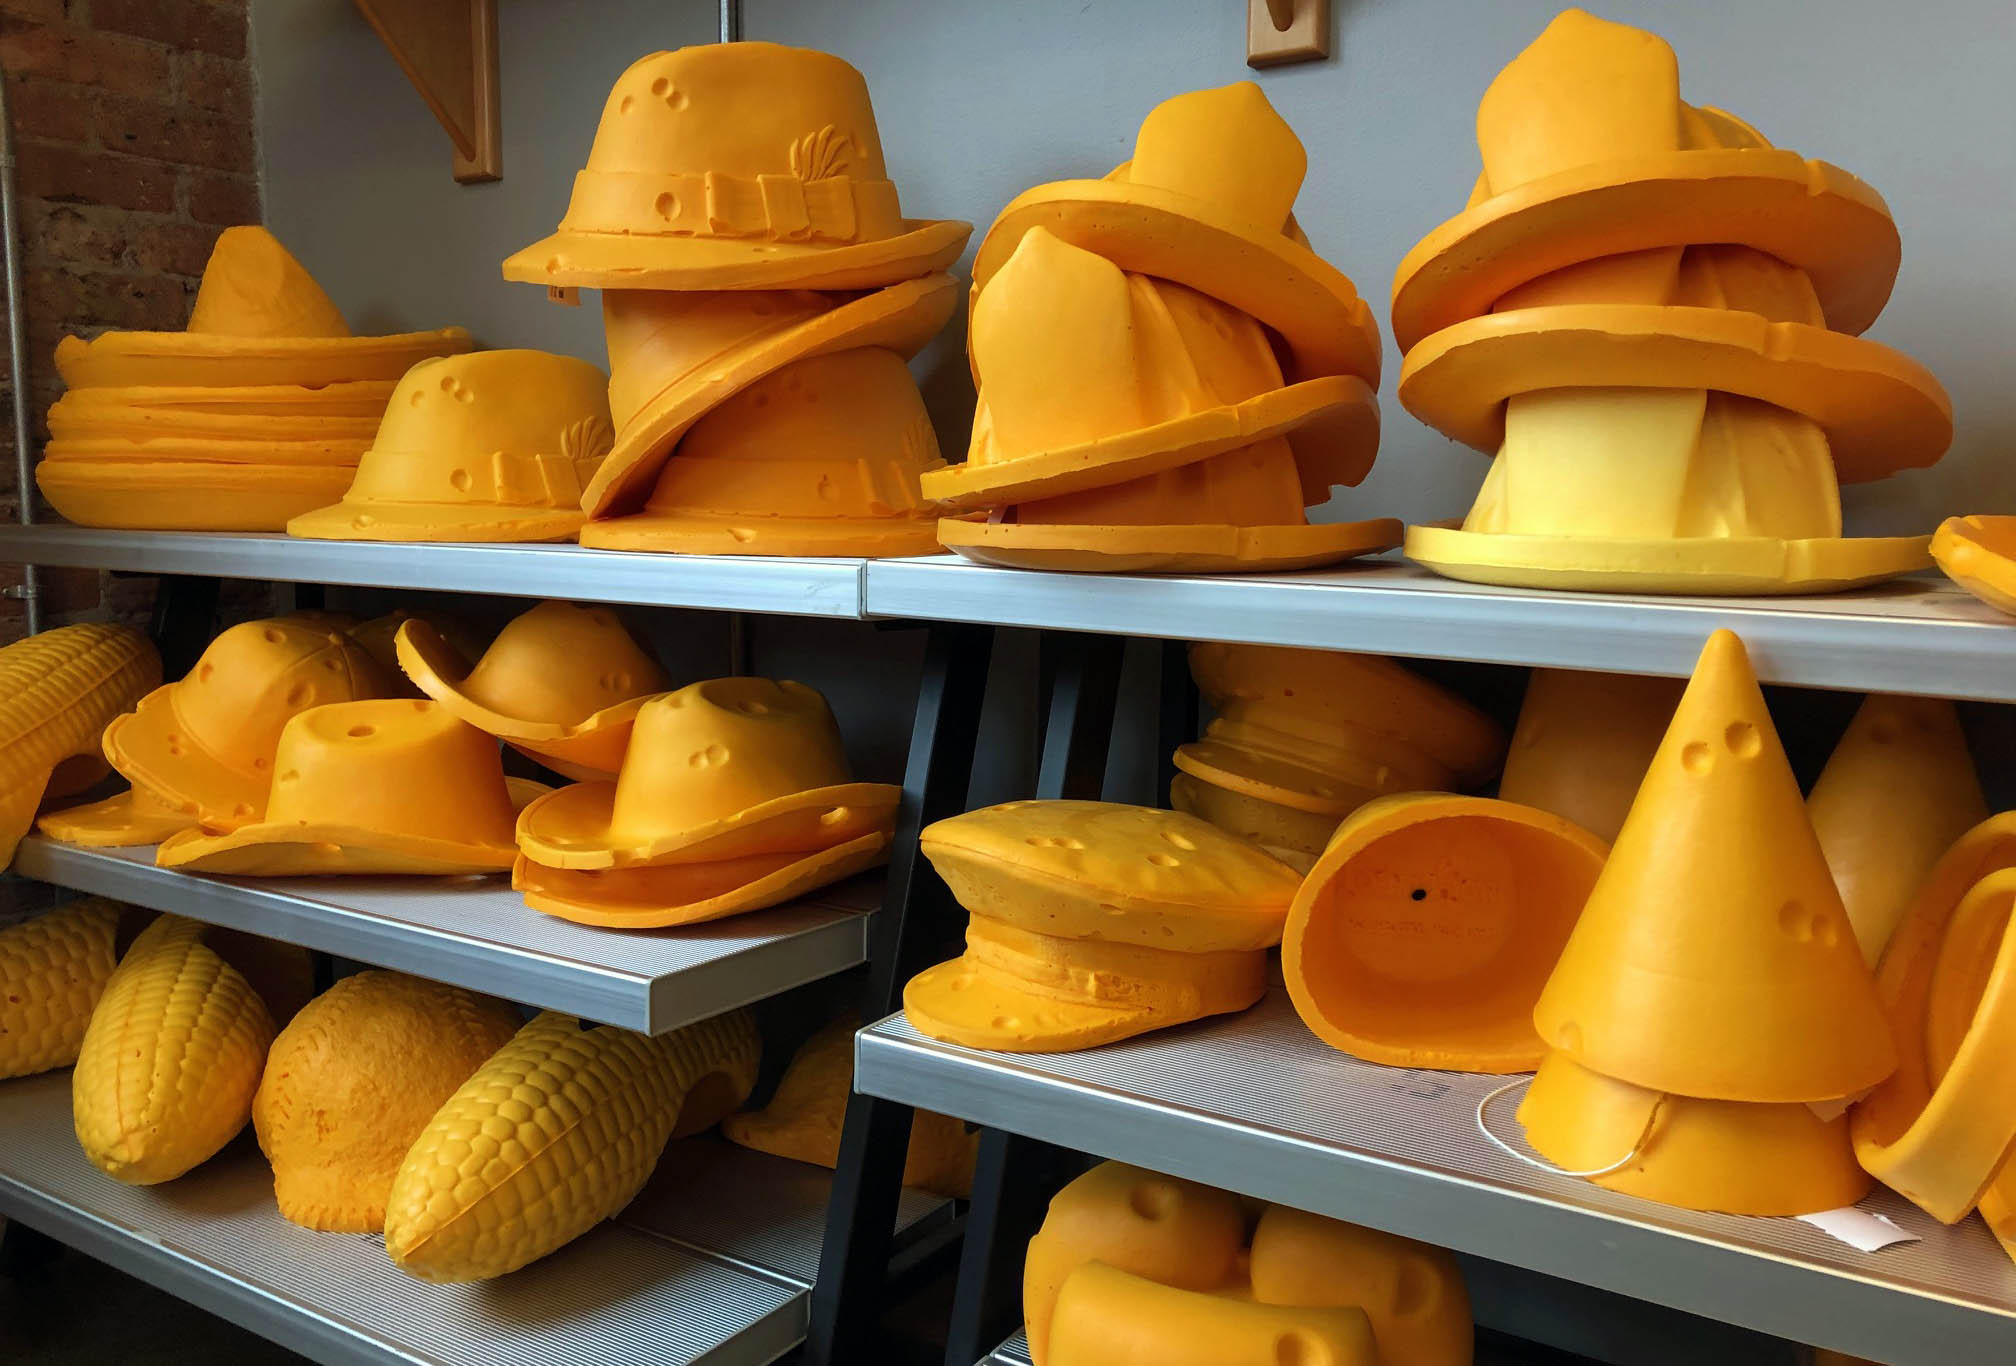 ‘Match made in heaven’: Packers acquire rights to iconic Cheesehead